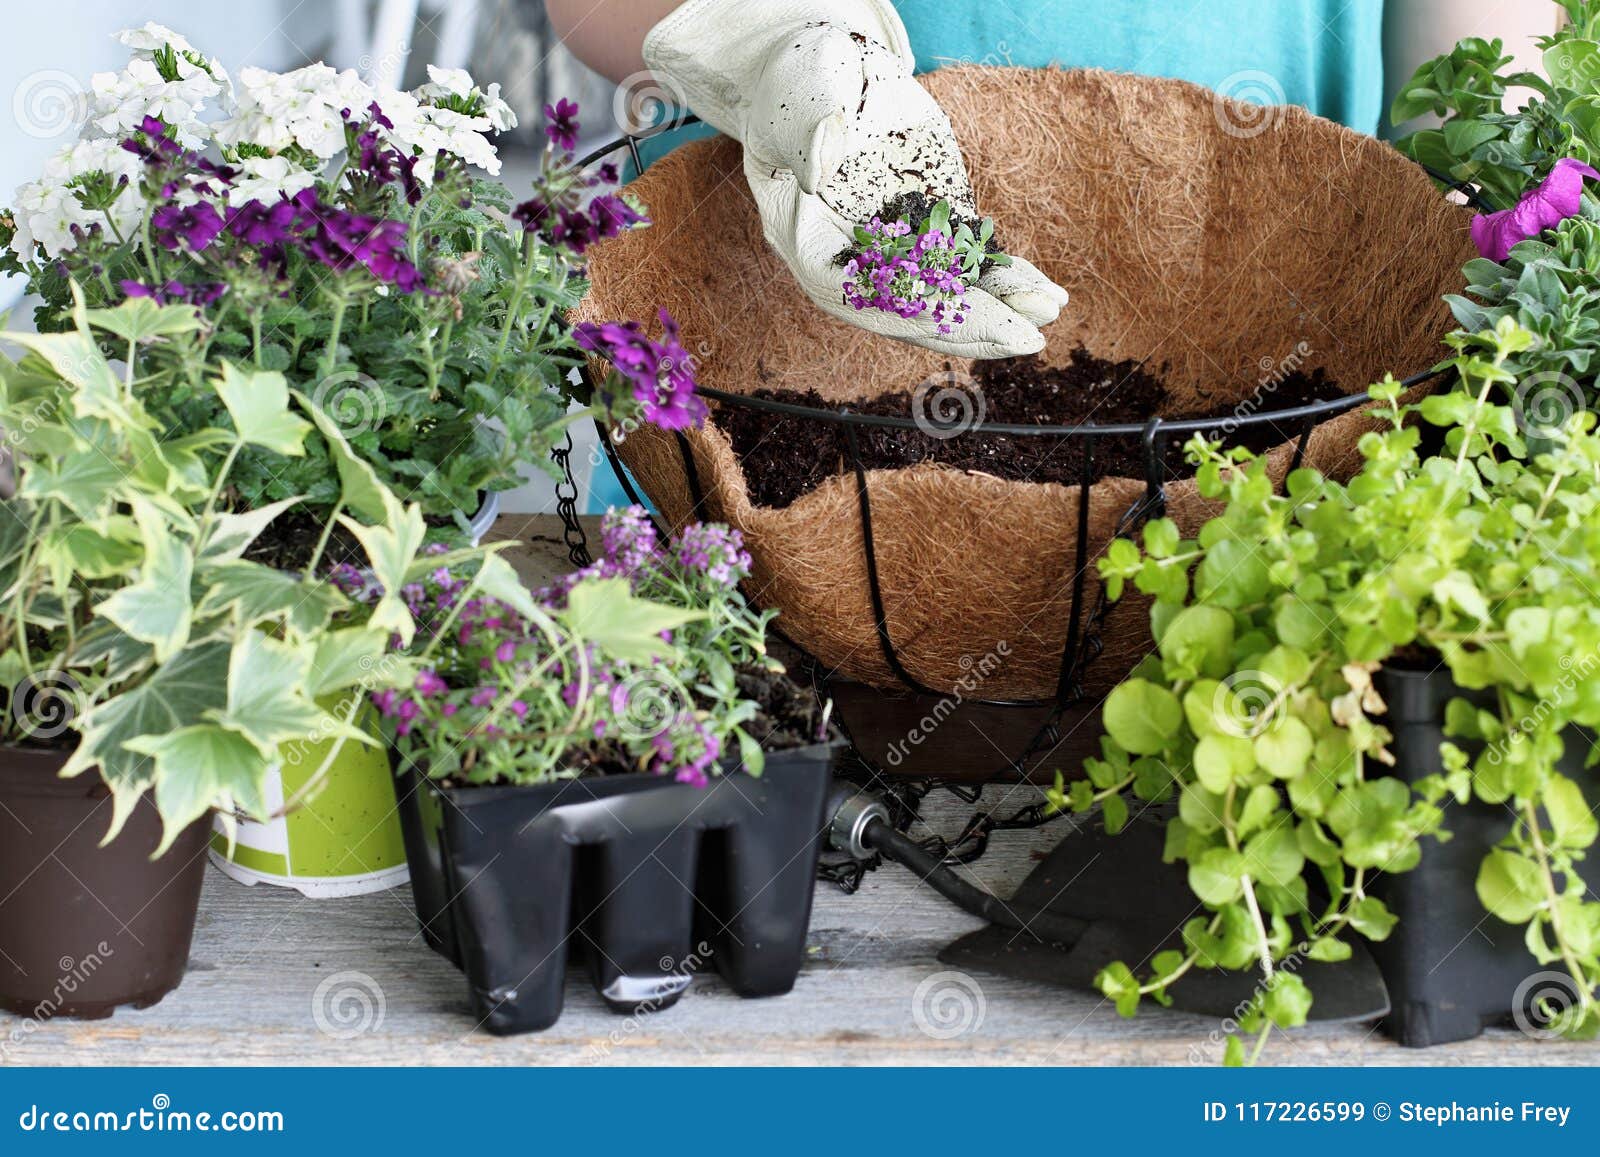 Hand Holding Alyssum Over a Hanging Basket of Flowers Stock Image ...